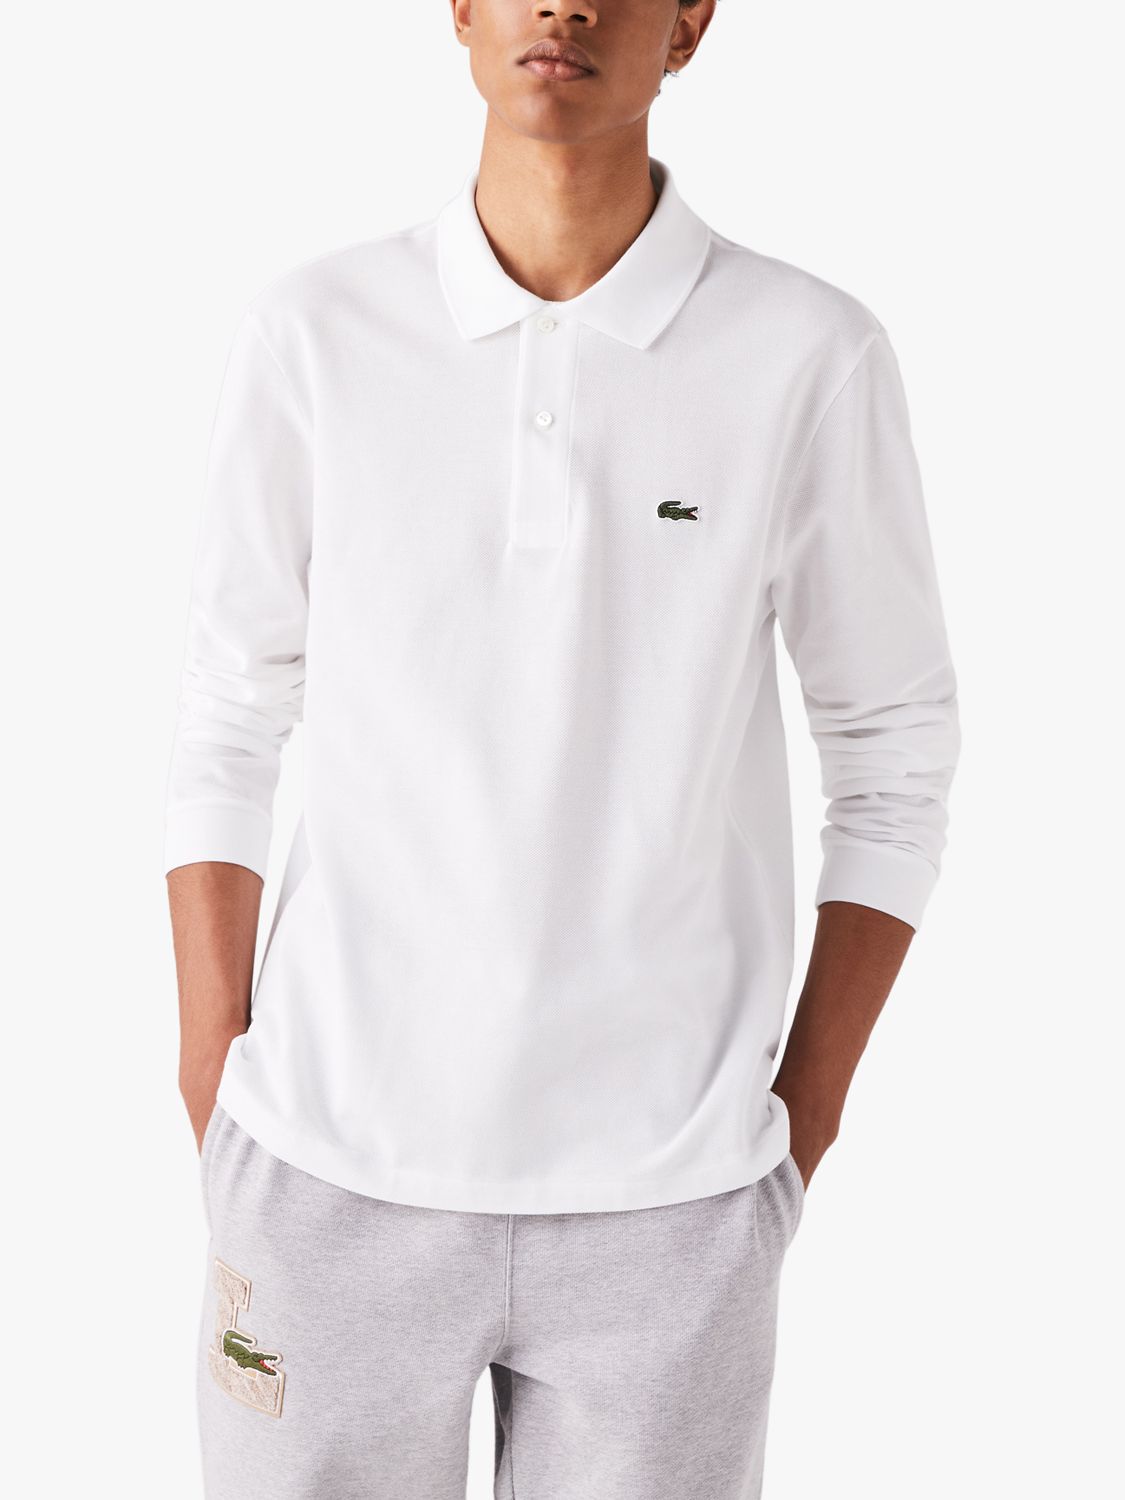 Lacoste L.12.12 Classic Regular Fit Short Sleeve Polo Shirt, Navy at John  Lewis & Partners